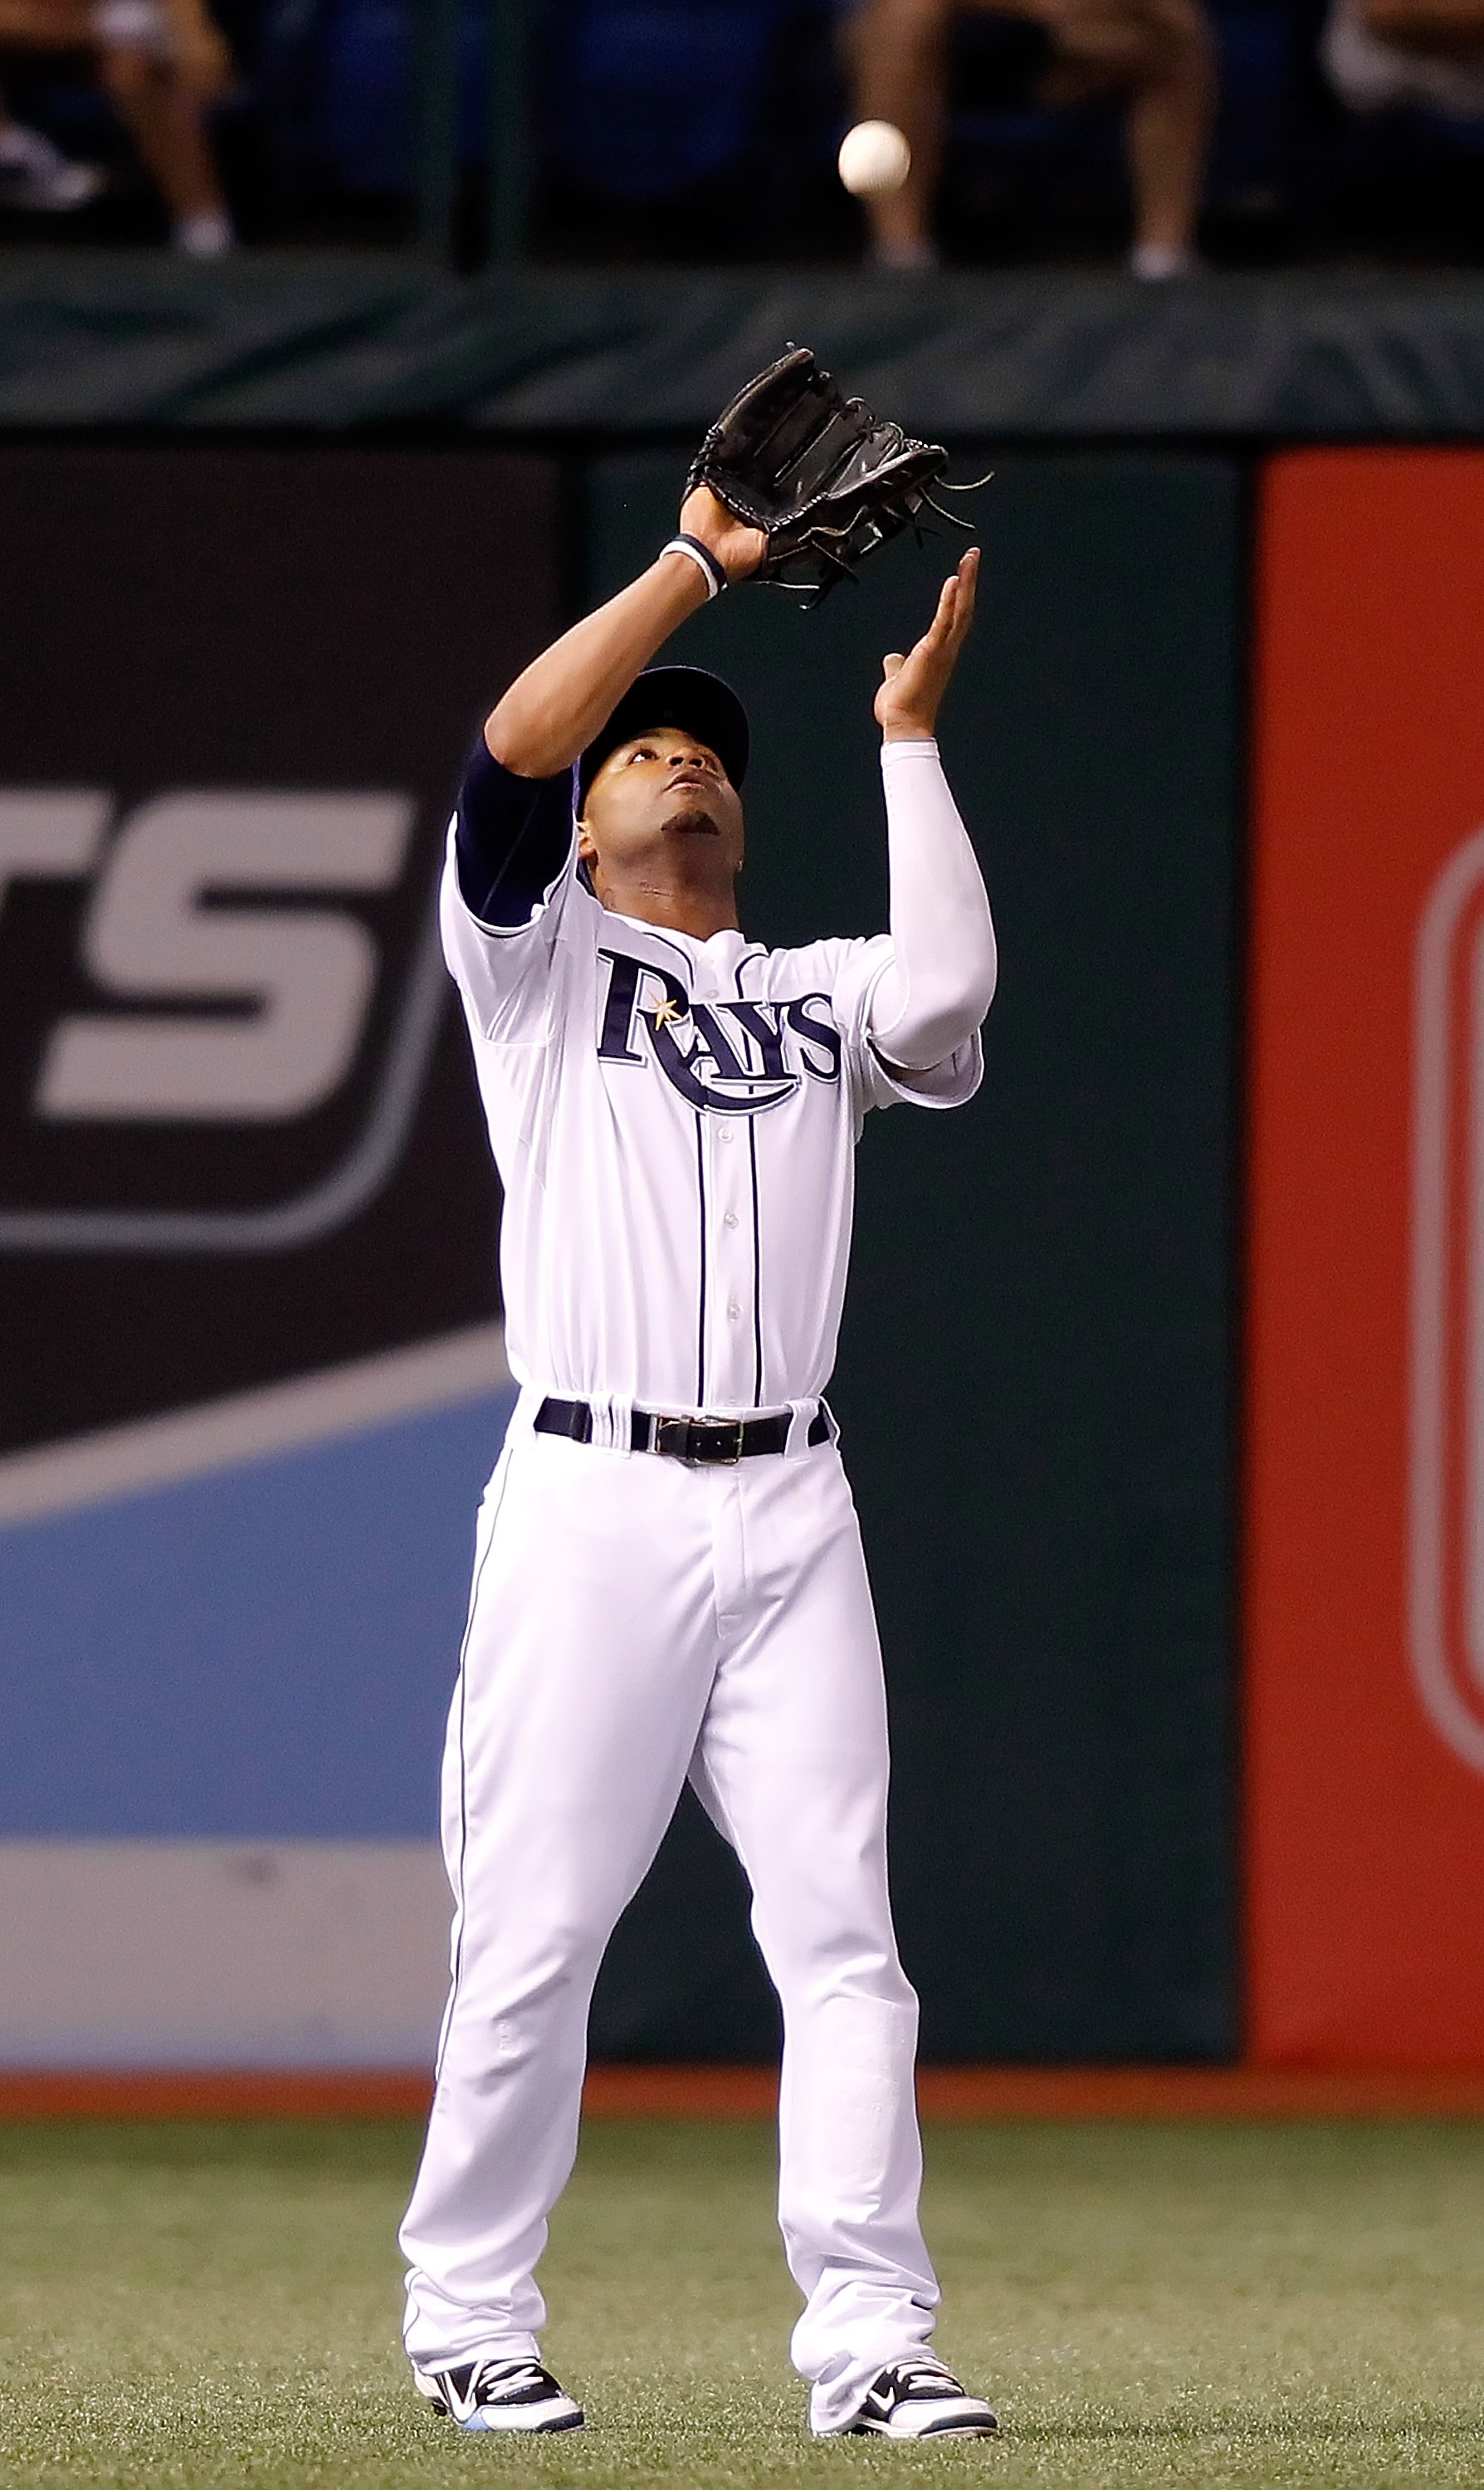 ST PETERSBURG, FL - SEPTEMBER 27:  Outfielder Carl Crawford #13 of the Tampa Bay Rays catches a fly ball against the Baltimore Orioles during the game at Tropicana Field on September 27, 2010 in St. Petersburg, Florida.  (Photo by J. Meric/Getty Images)